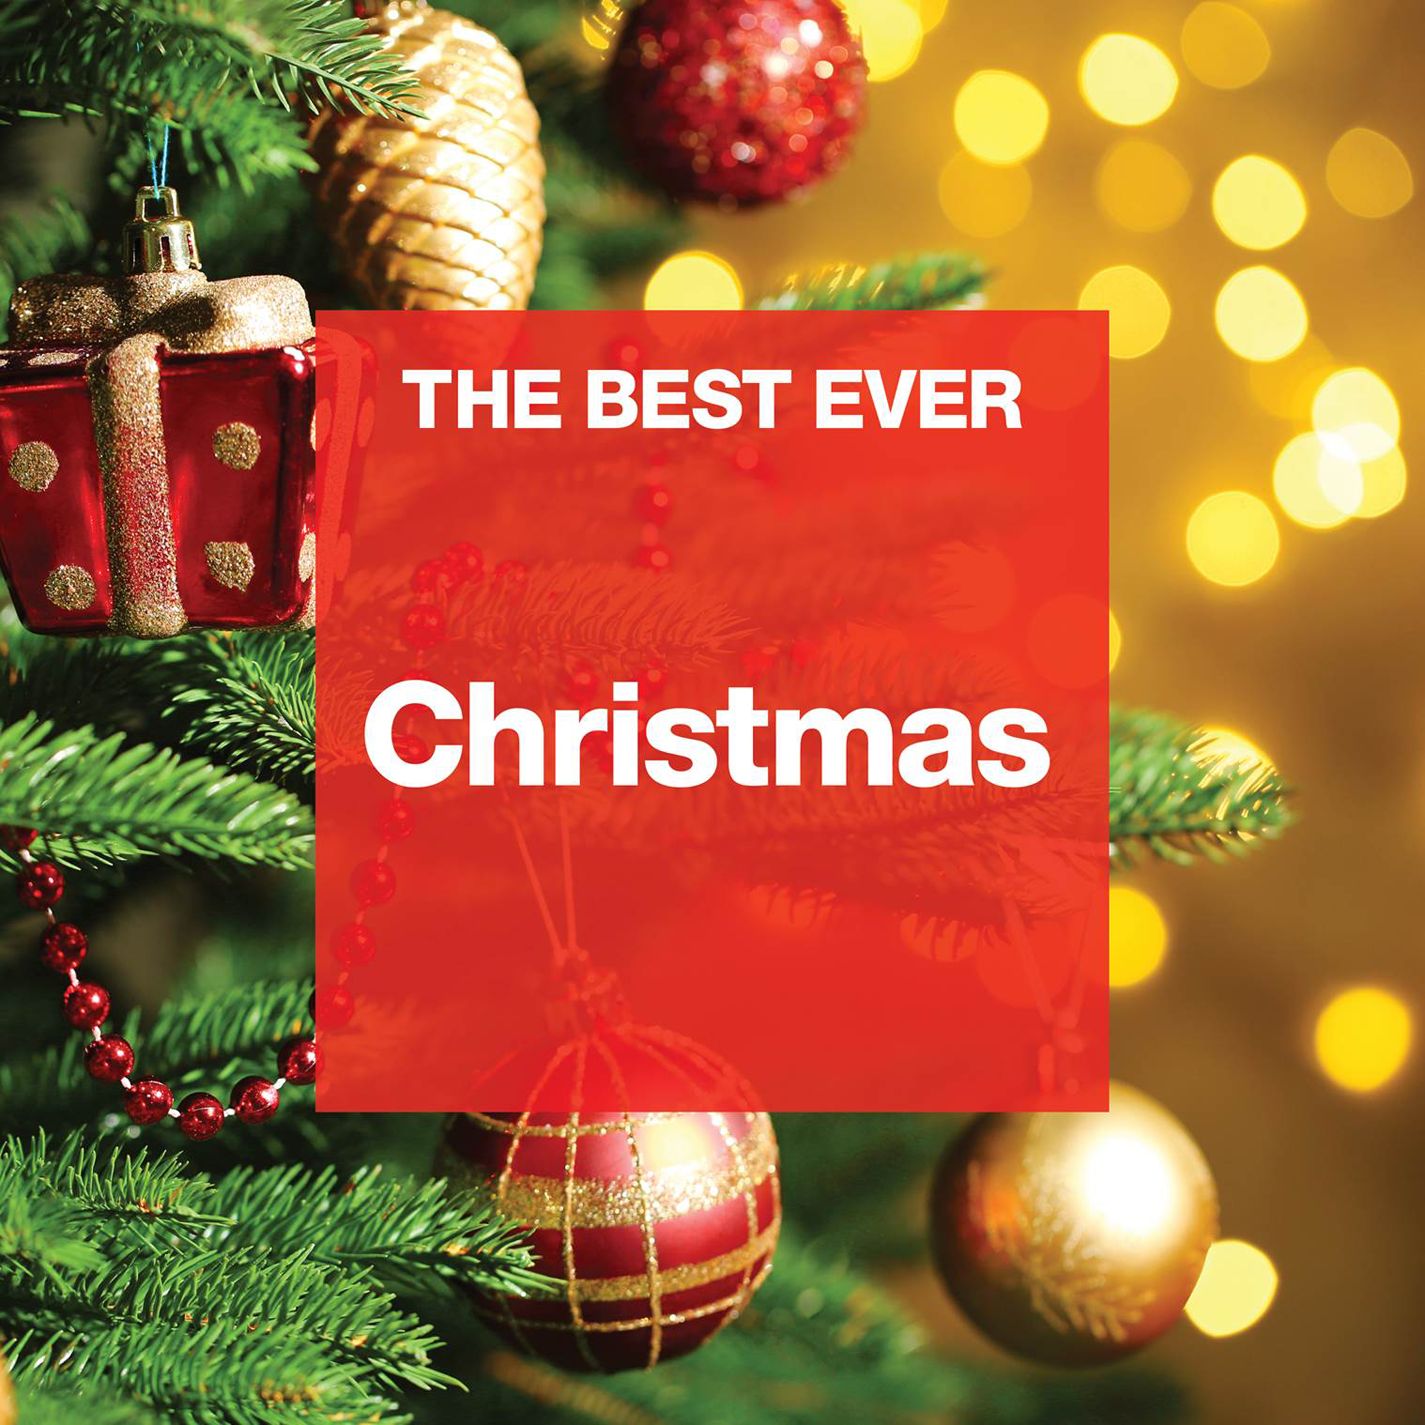 THE BEST EVER: Christmas